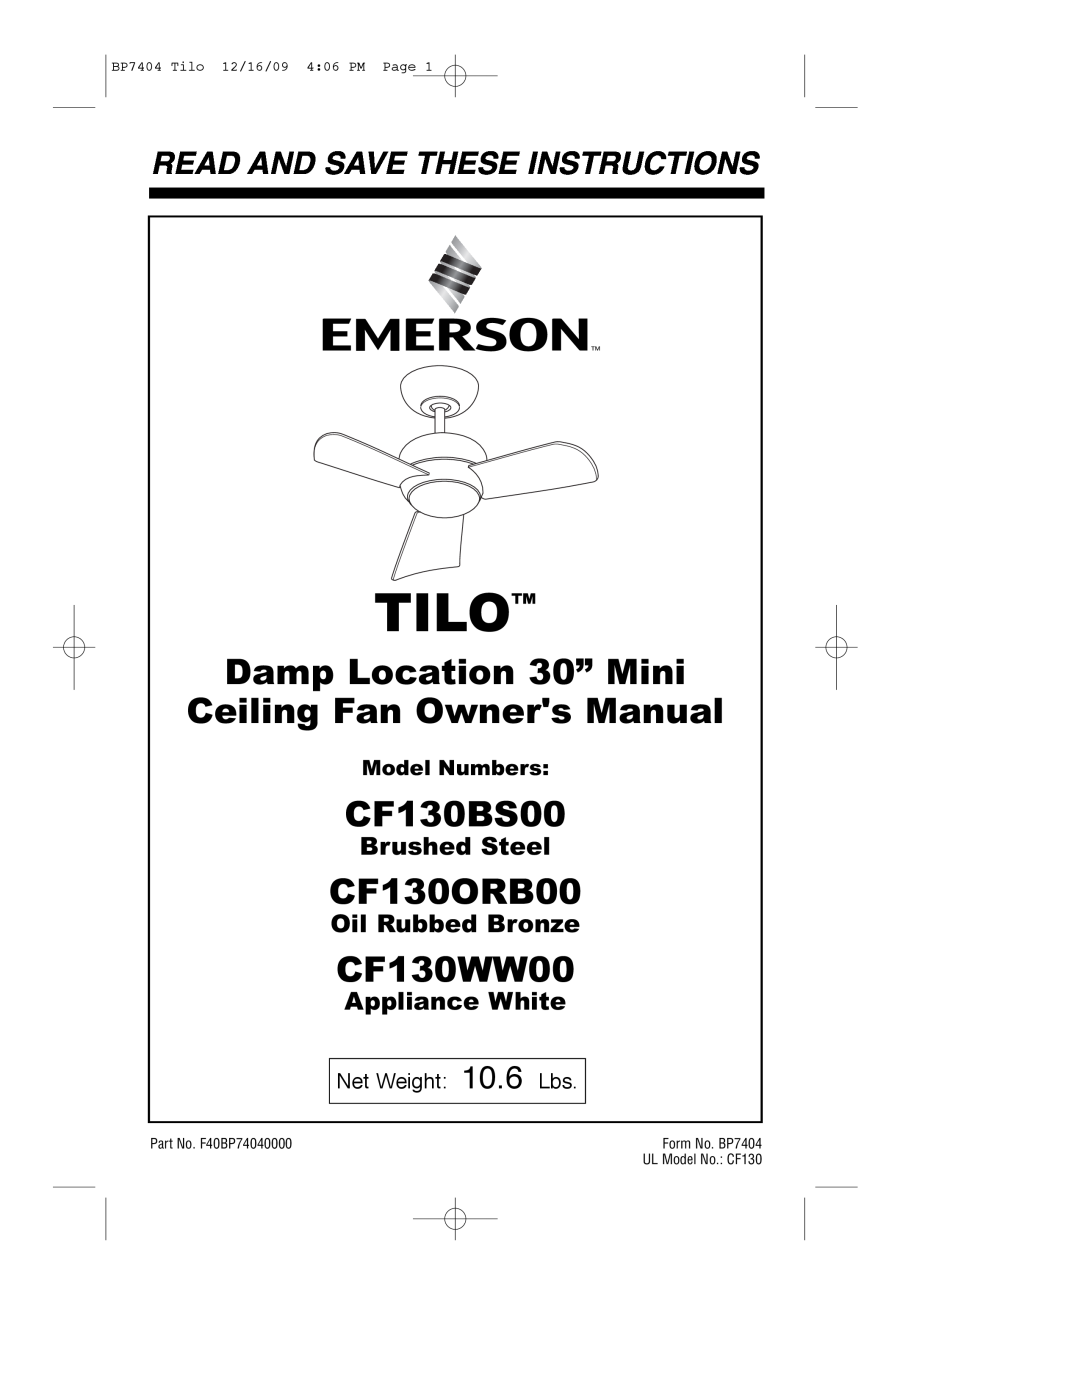 Emerson CF130BS00 owner manual Model Numbers, Tilo, CF130ORB00, CF130WW00, Read And Save These Instructions, Brushed Steel 